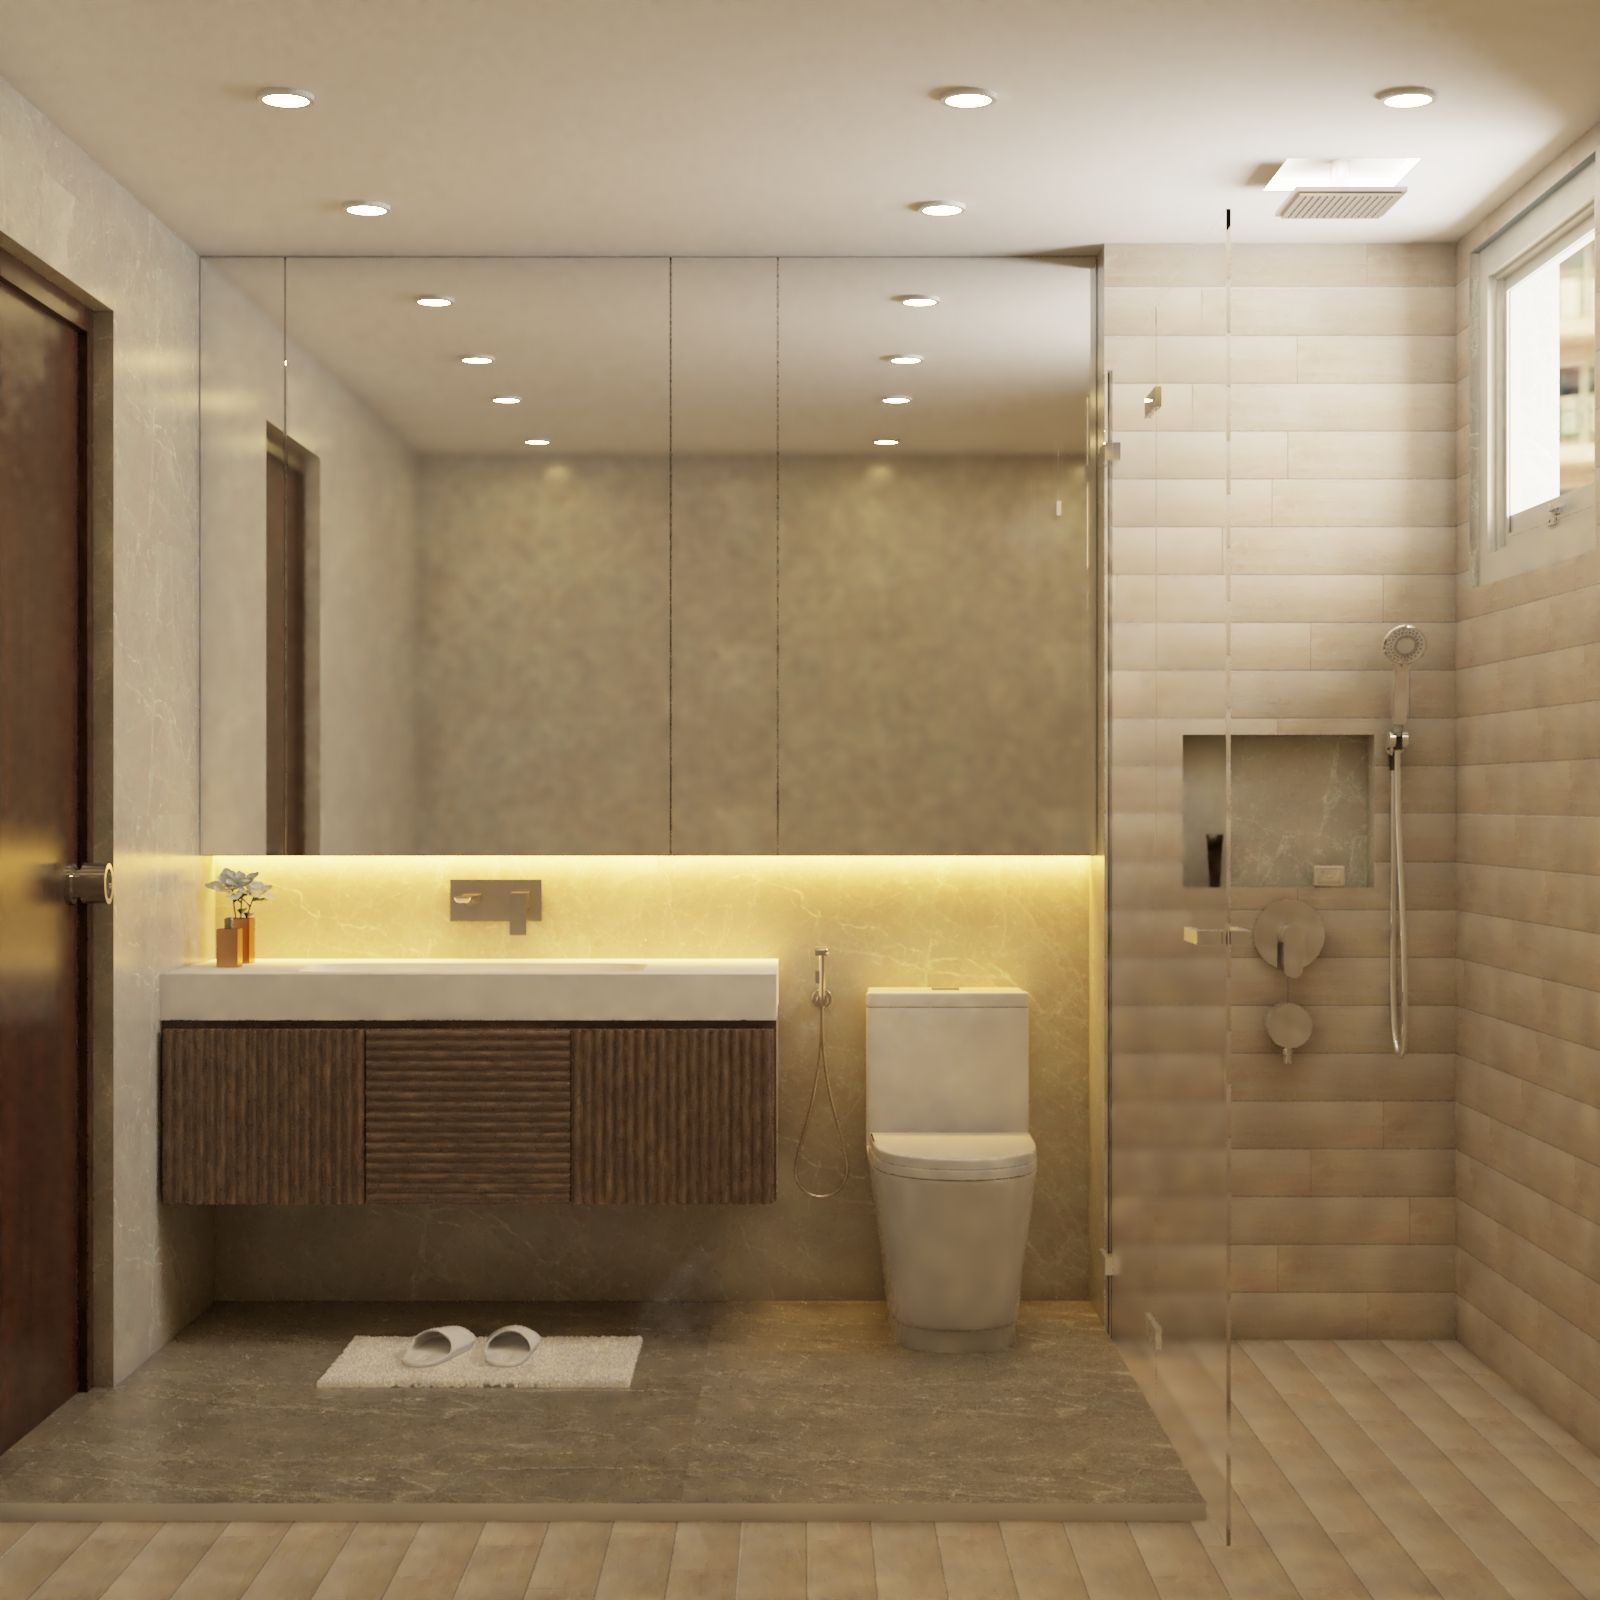 Contemporary Style Spacious Bathroom Design With Wall-Mounted Storage Cabinet